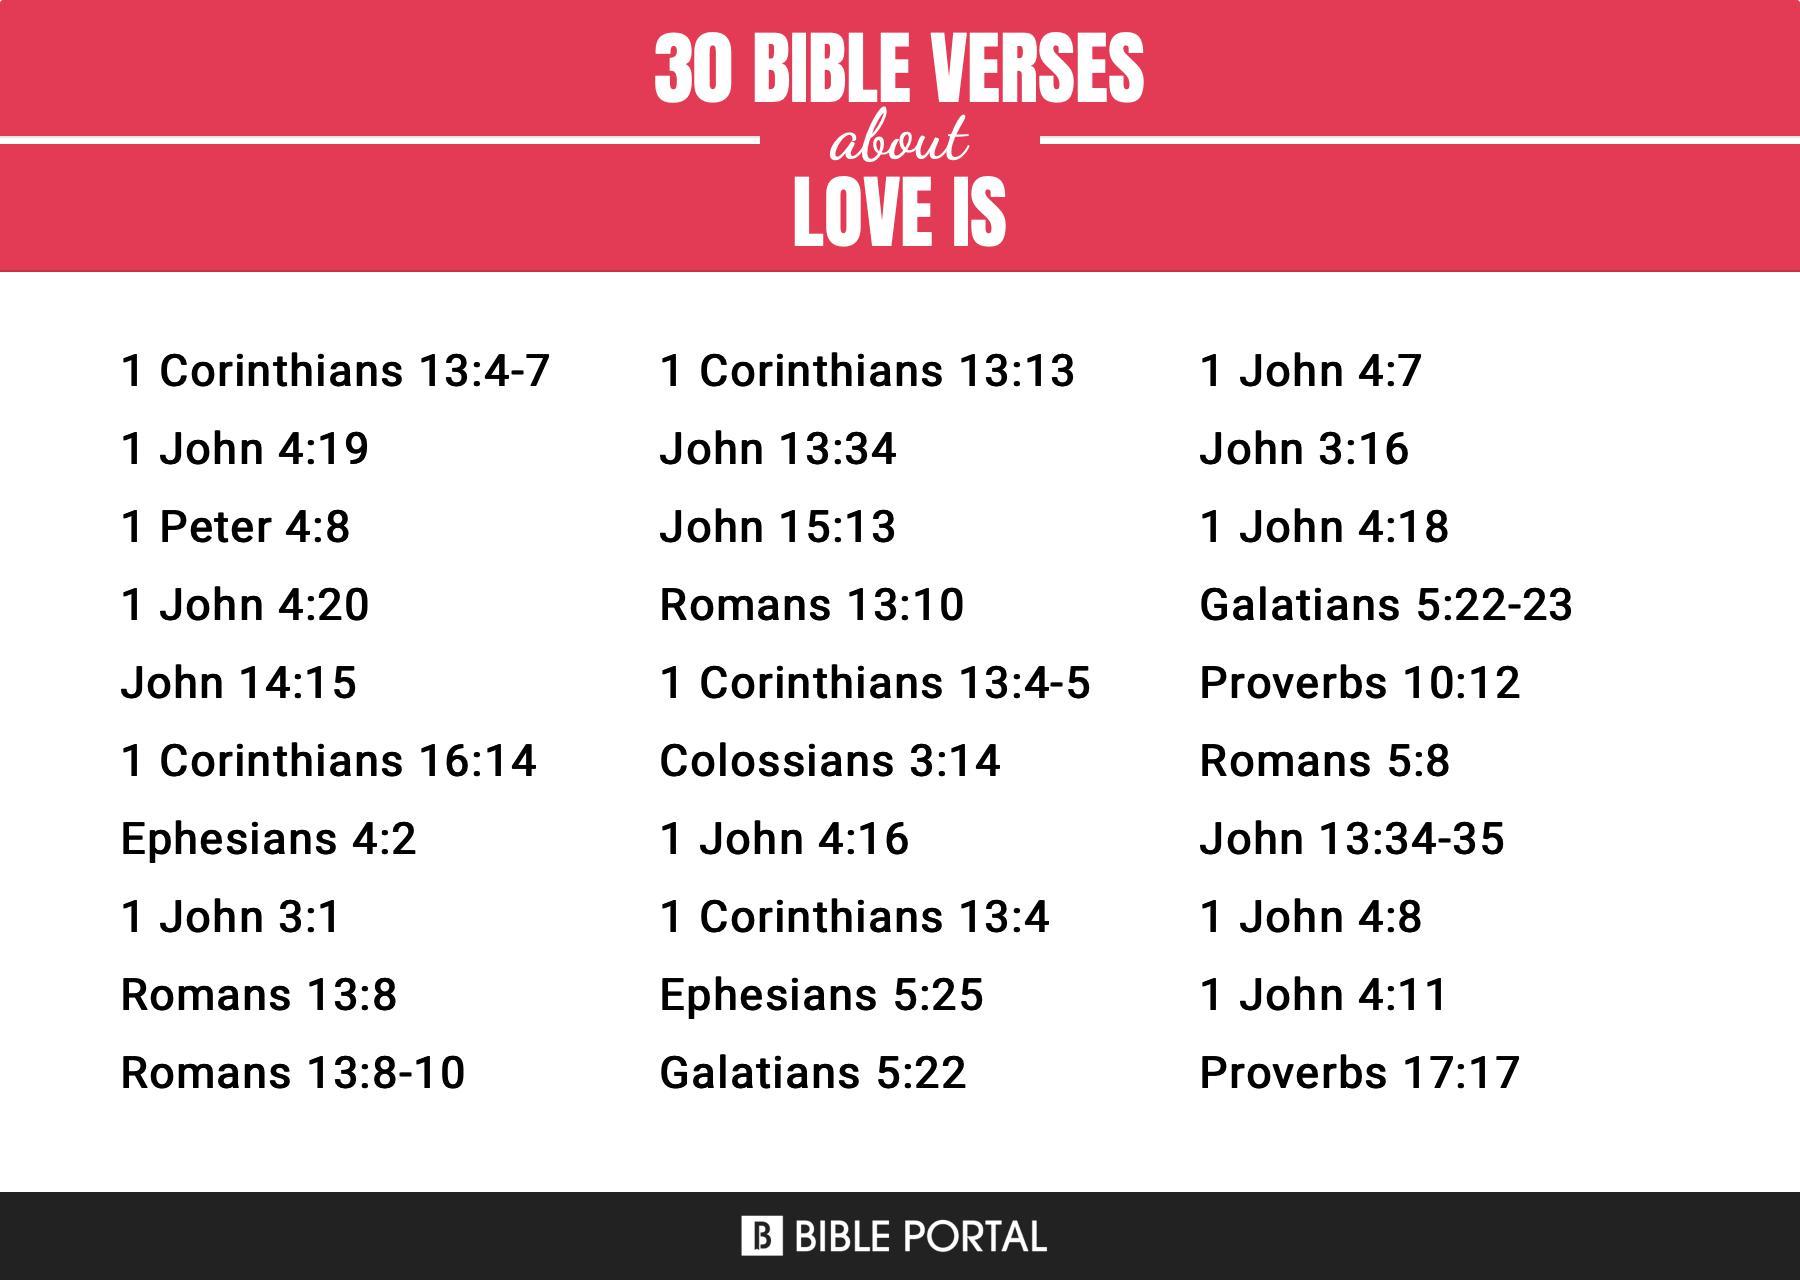 What Does the Bible Say about Love Is?